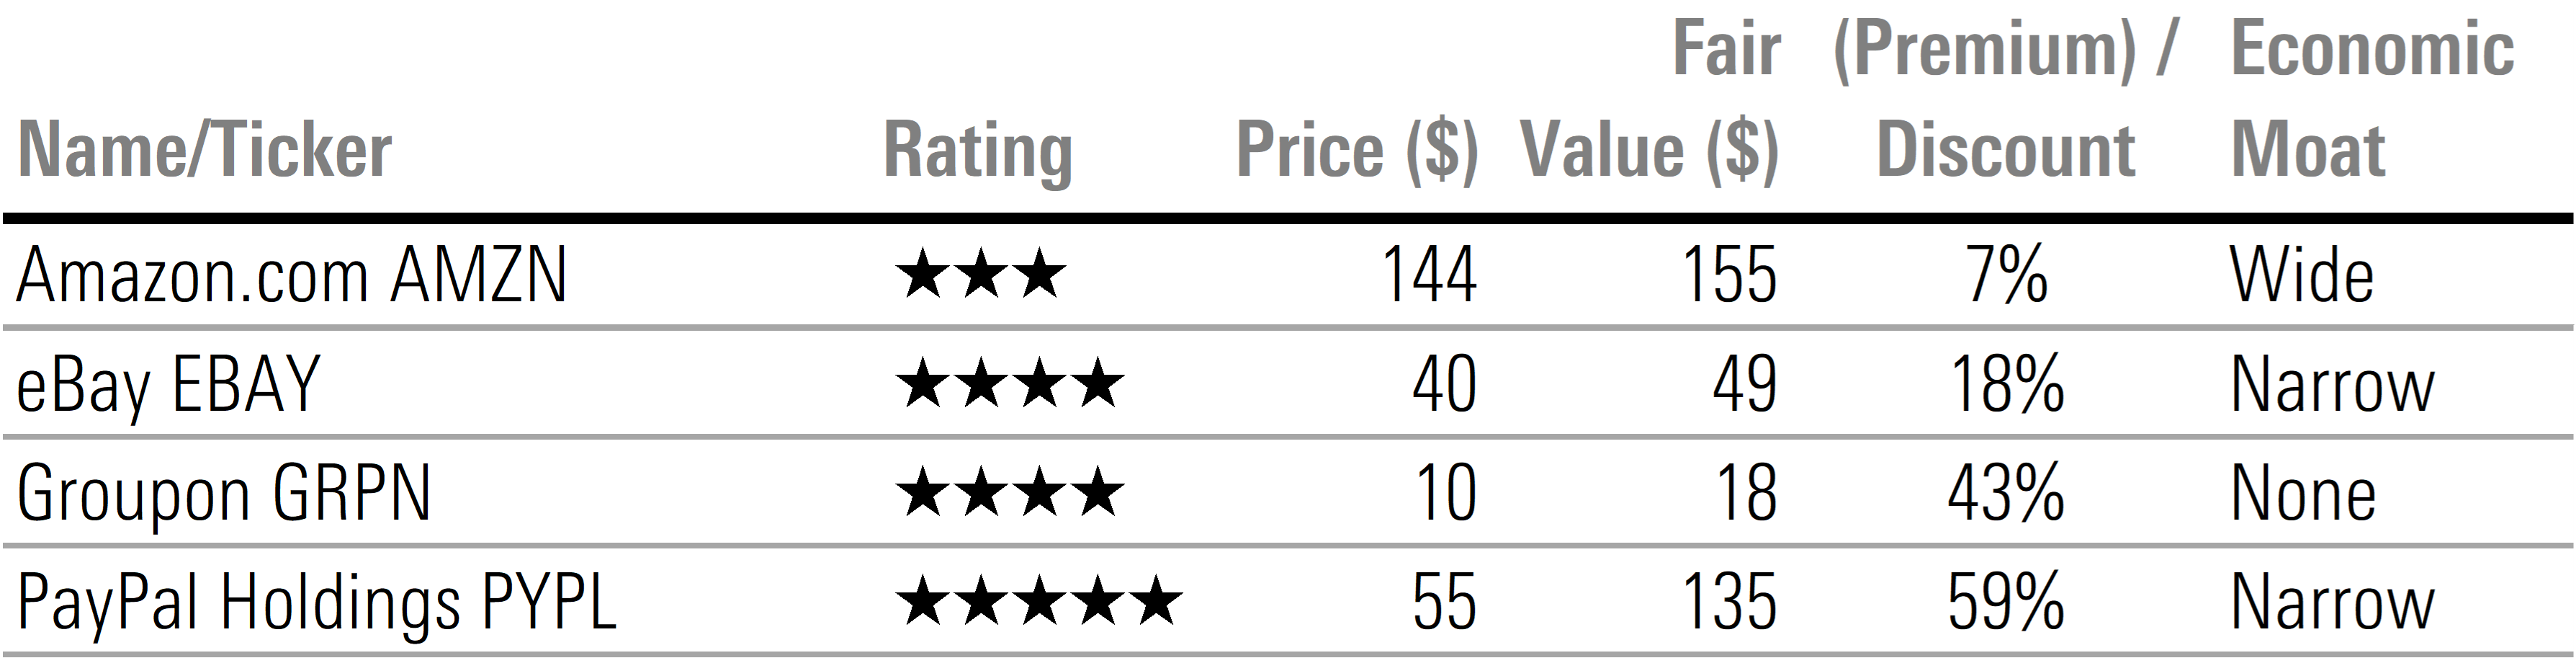 Table displaying star rating, price, fair value, premium or discount, and economic moat rating for stocks under Morningstar coverage in the e-commerce sector.